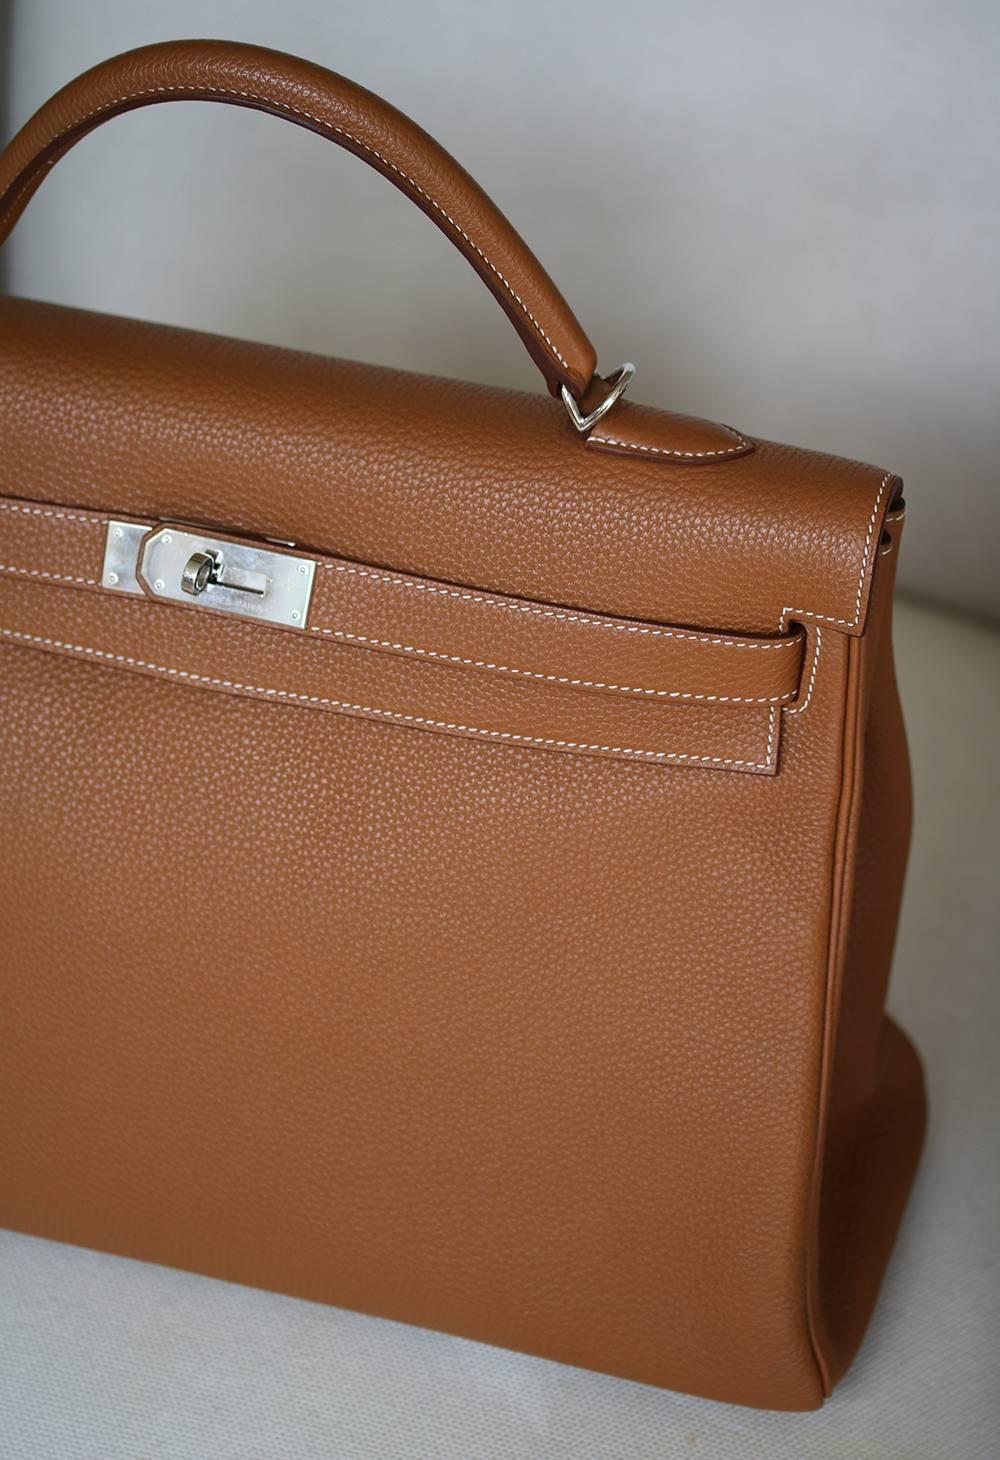 The most fabulous of all bags can be yours today!

Luxuriously rich coloured with tonal top stitching.

This Kelly is in excellent condition - very minor scratching to the hardware. There is no damage to the corners - it has been carefully kept by